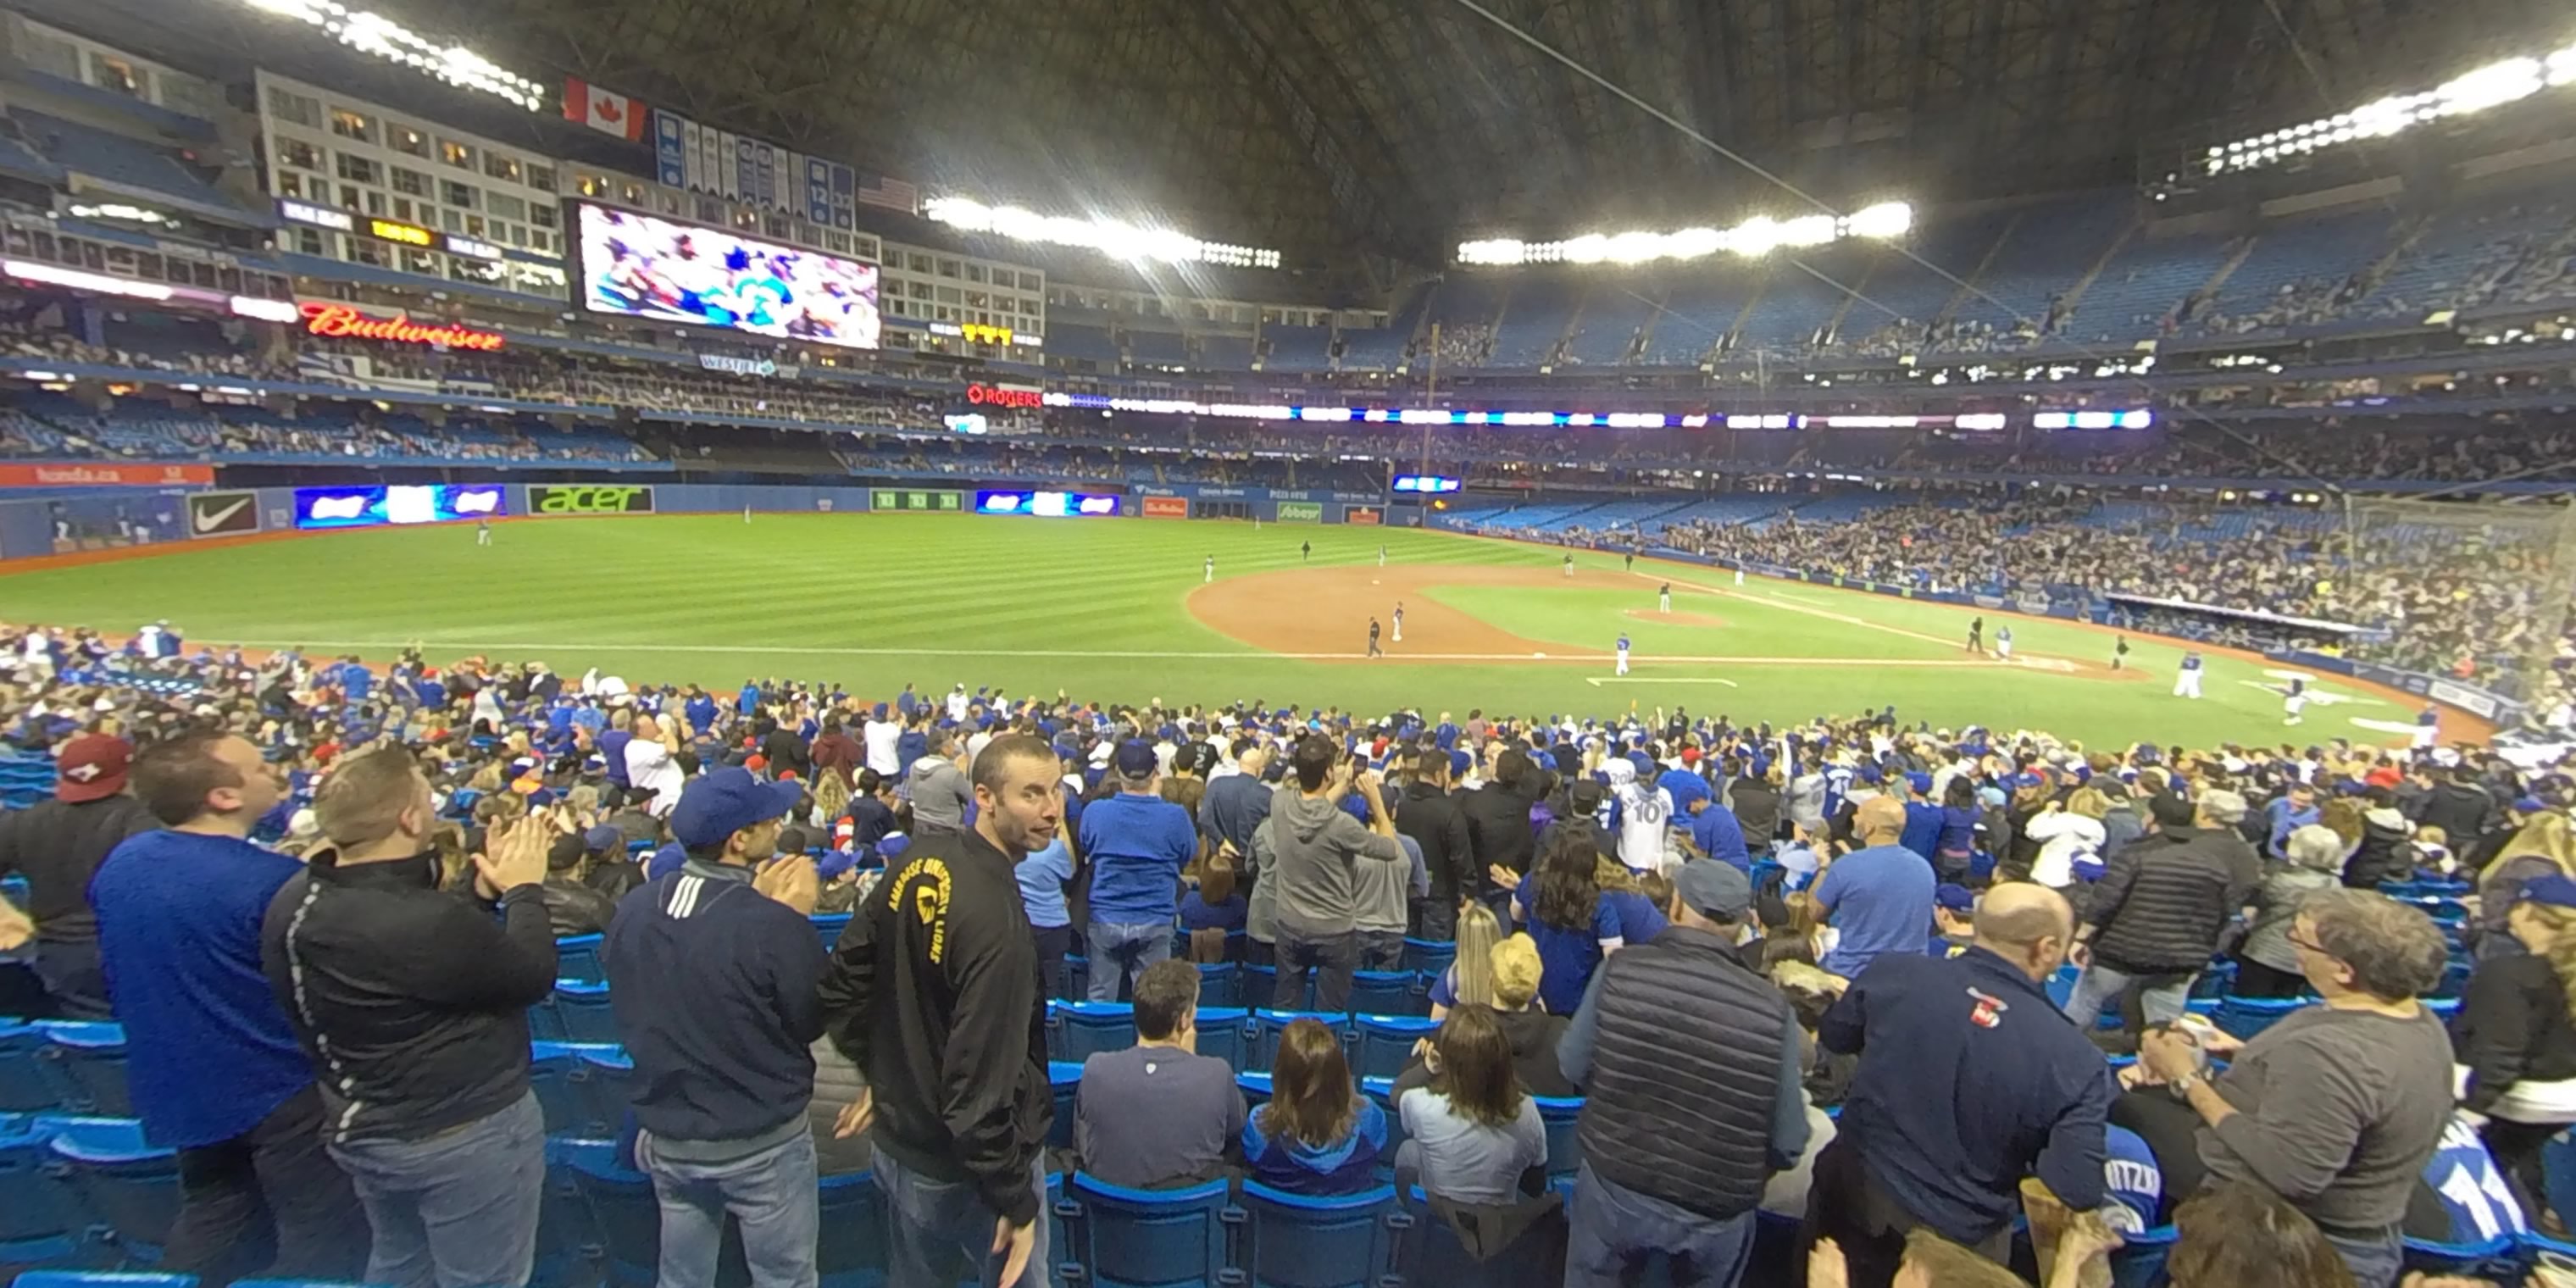 section 128 panoramic seat view  for baseball - rogers centre